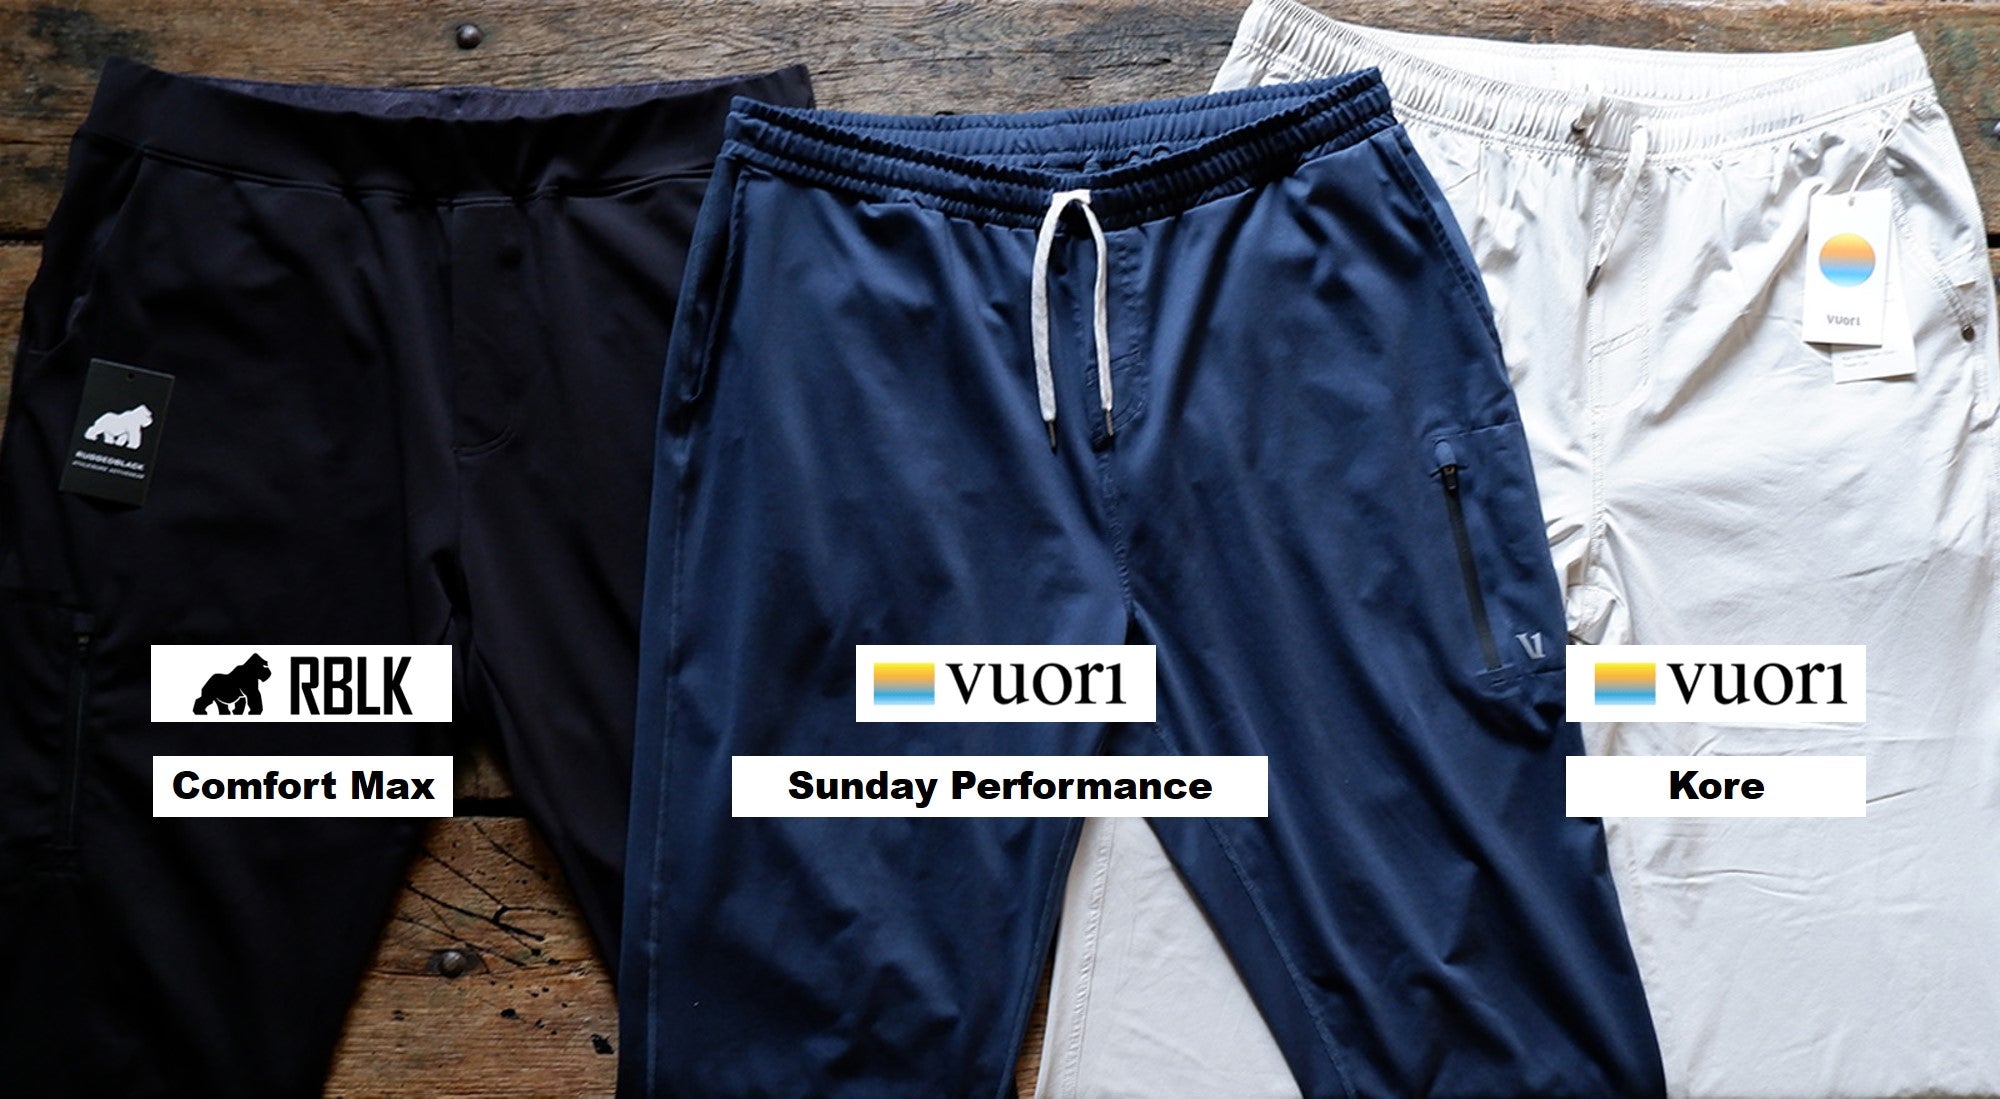 Vuori's Performance Clothes Are made with Versatility and Comfort